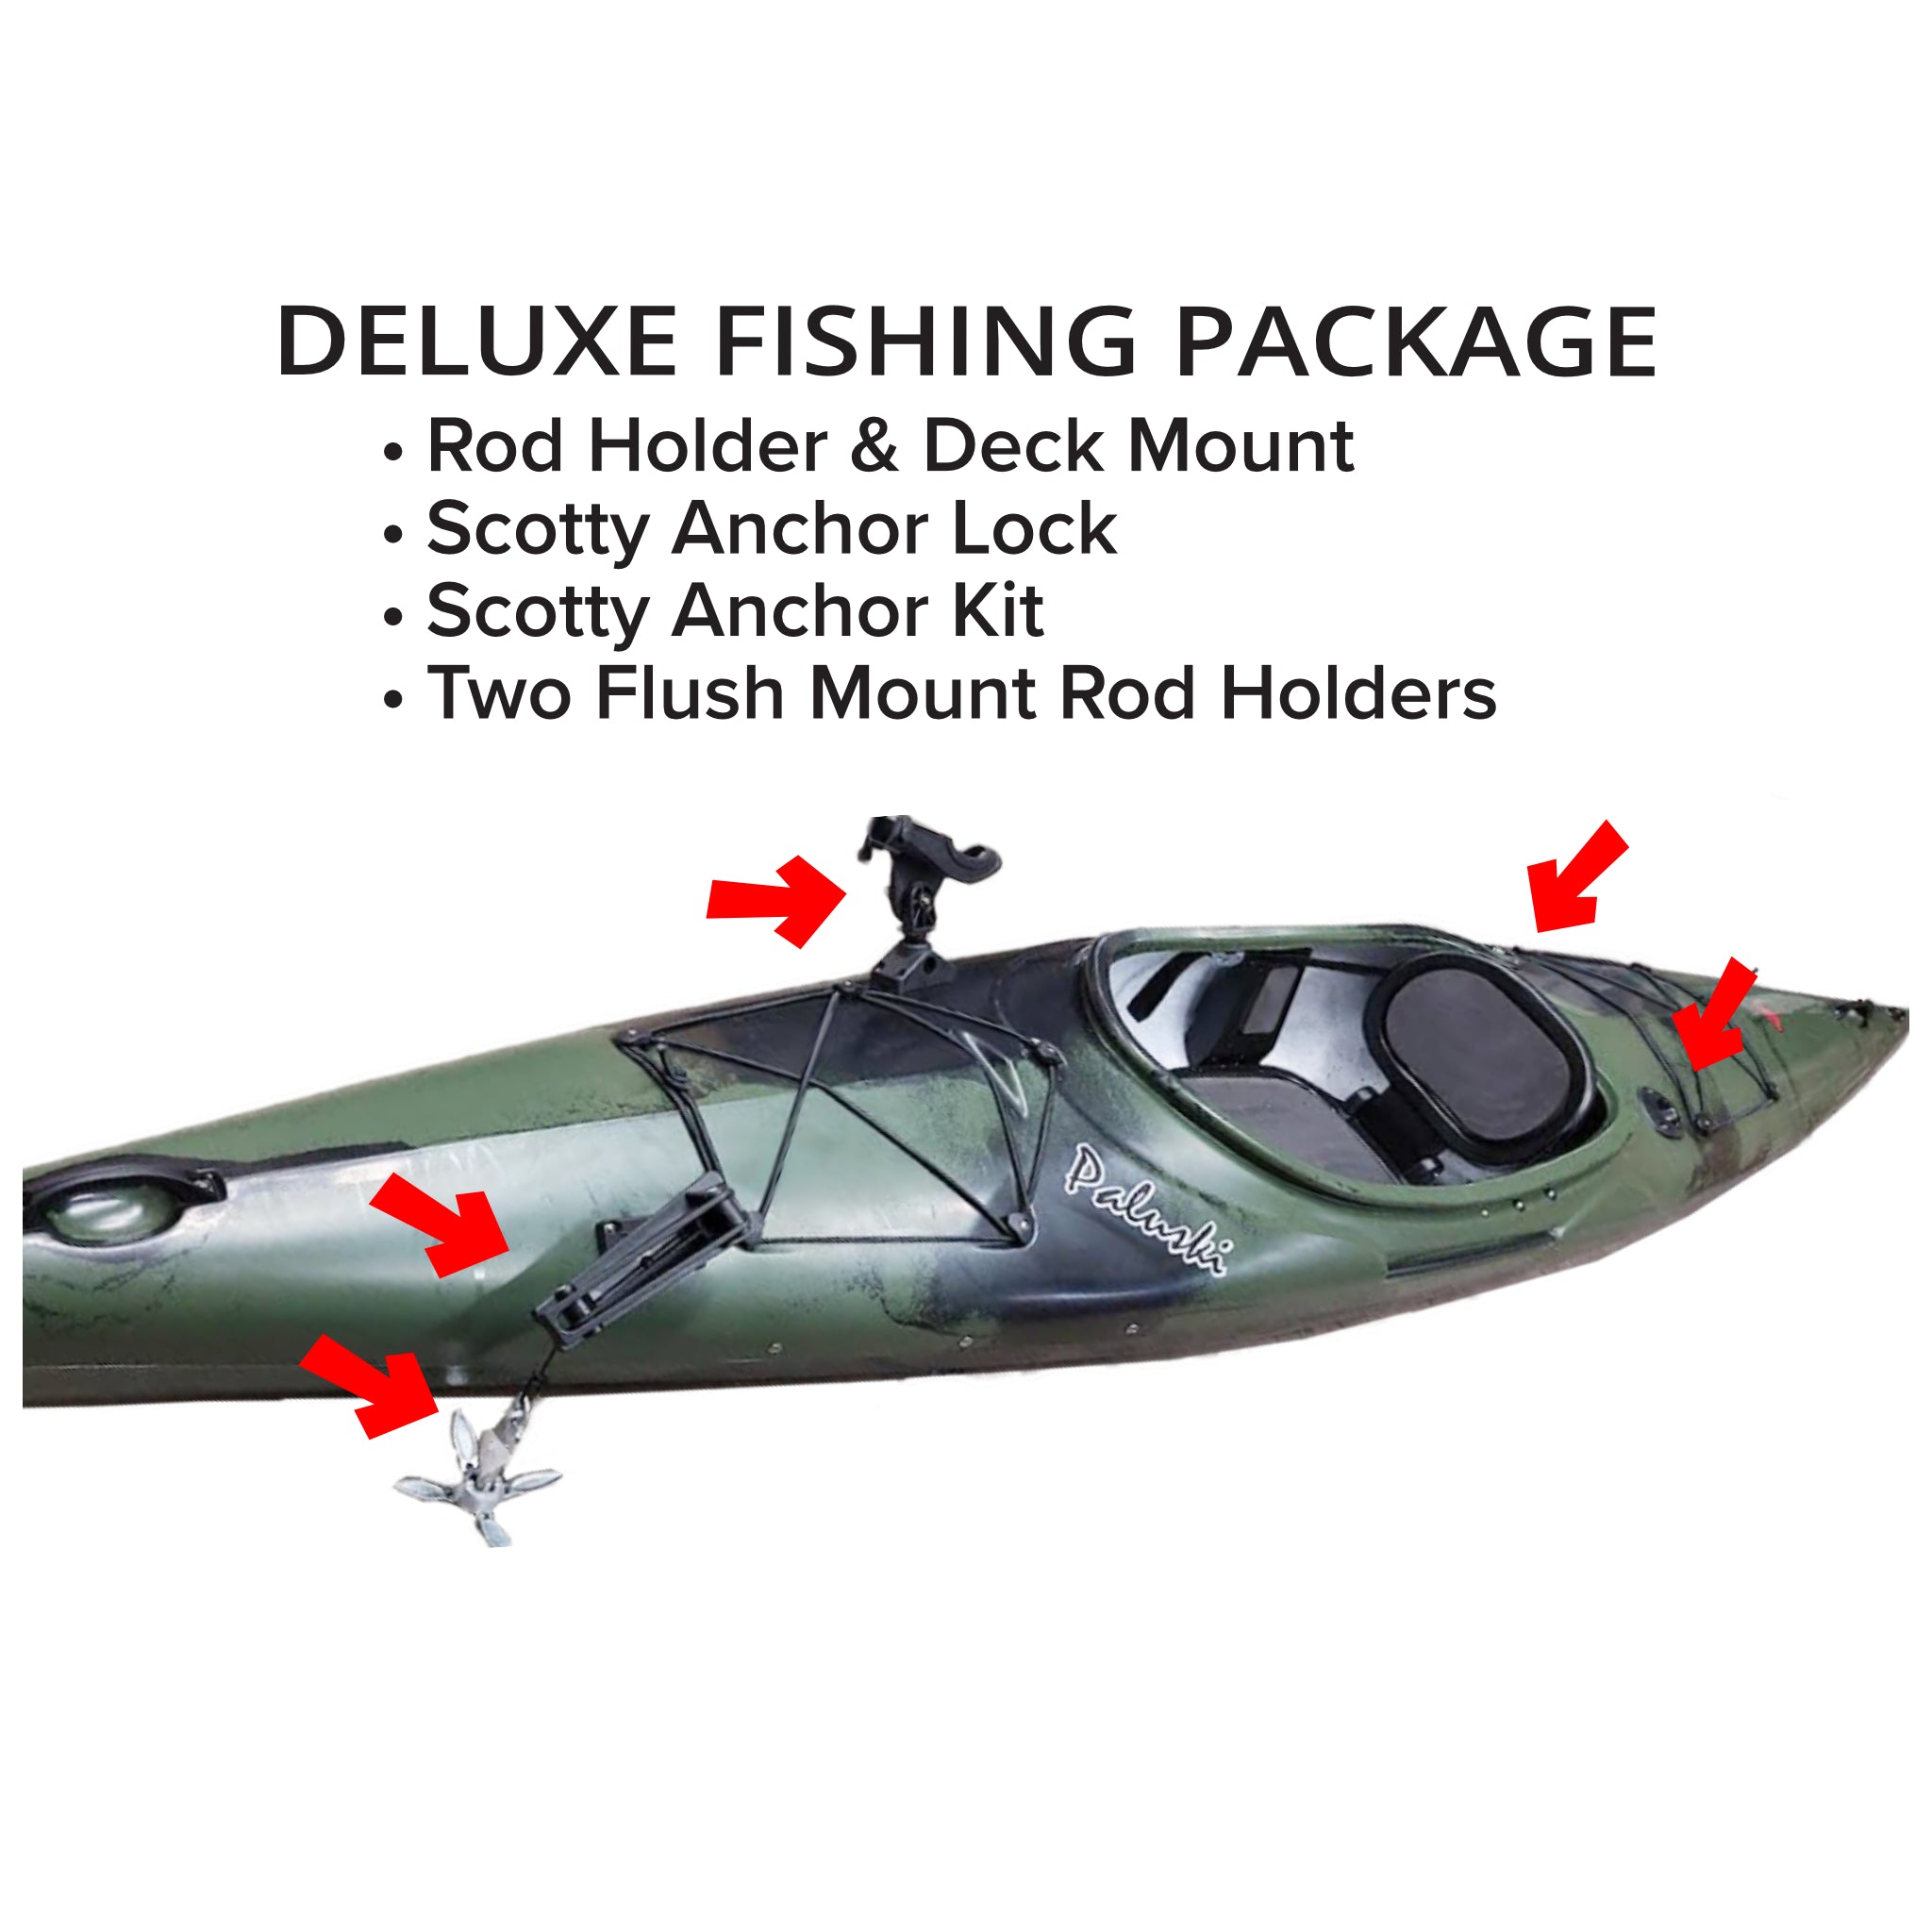 Deluxe Fishing Package